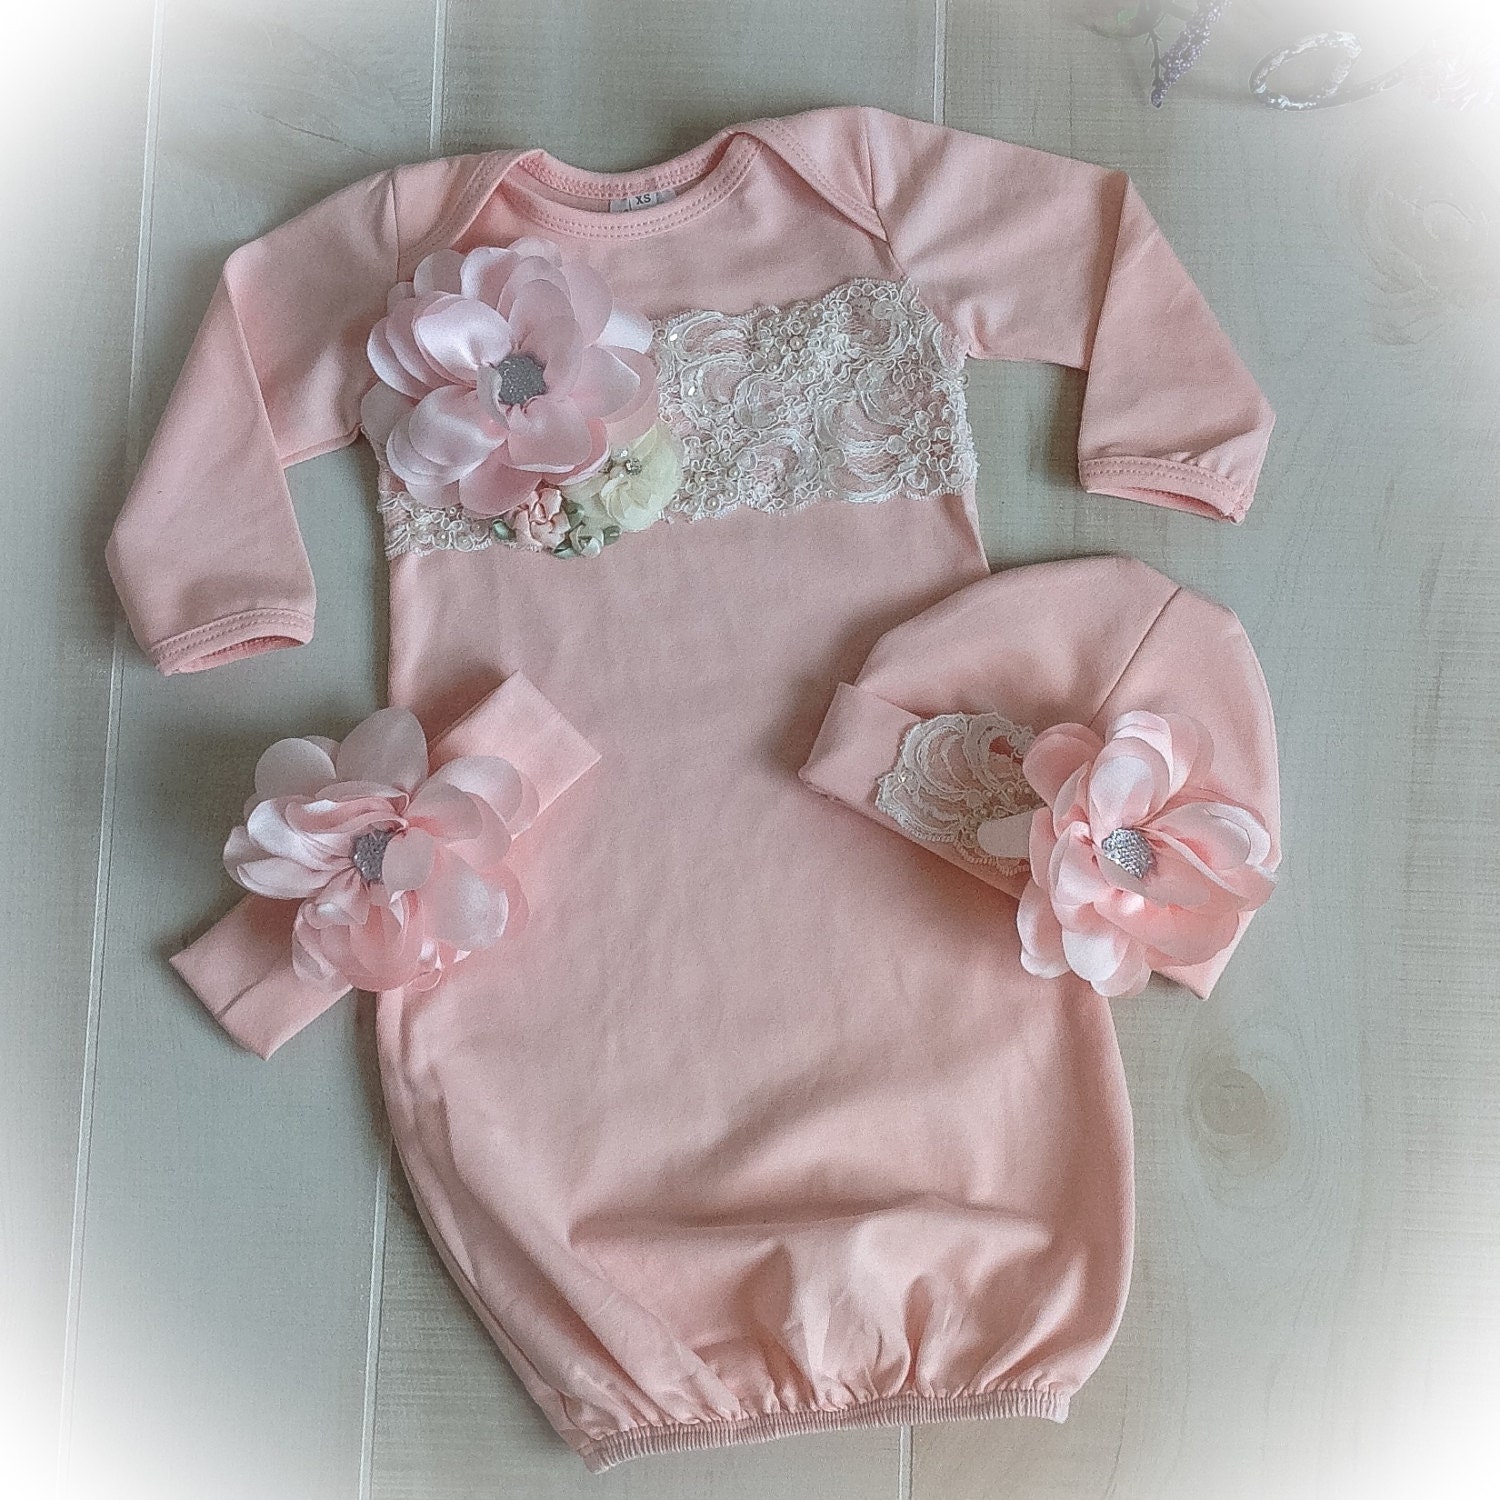 Newborn Girl Take Home Outfit Blush Pink Layette by PoshBabyBlooms